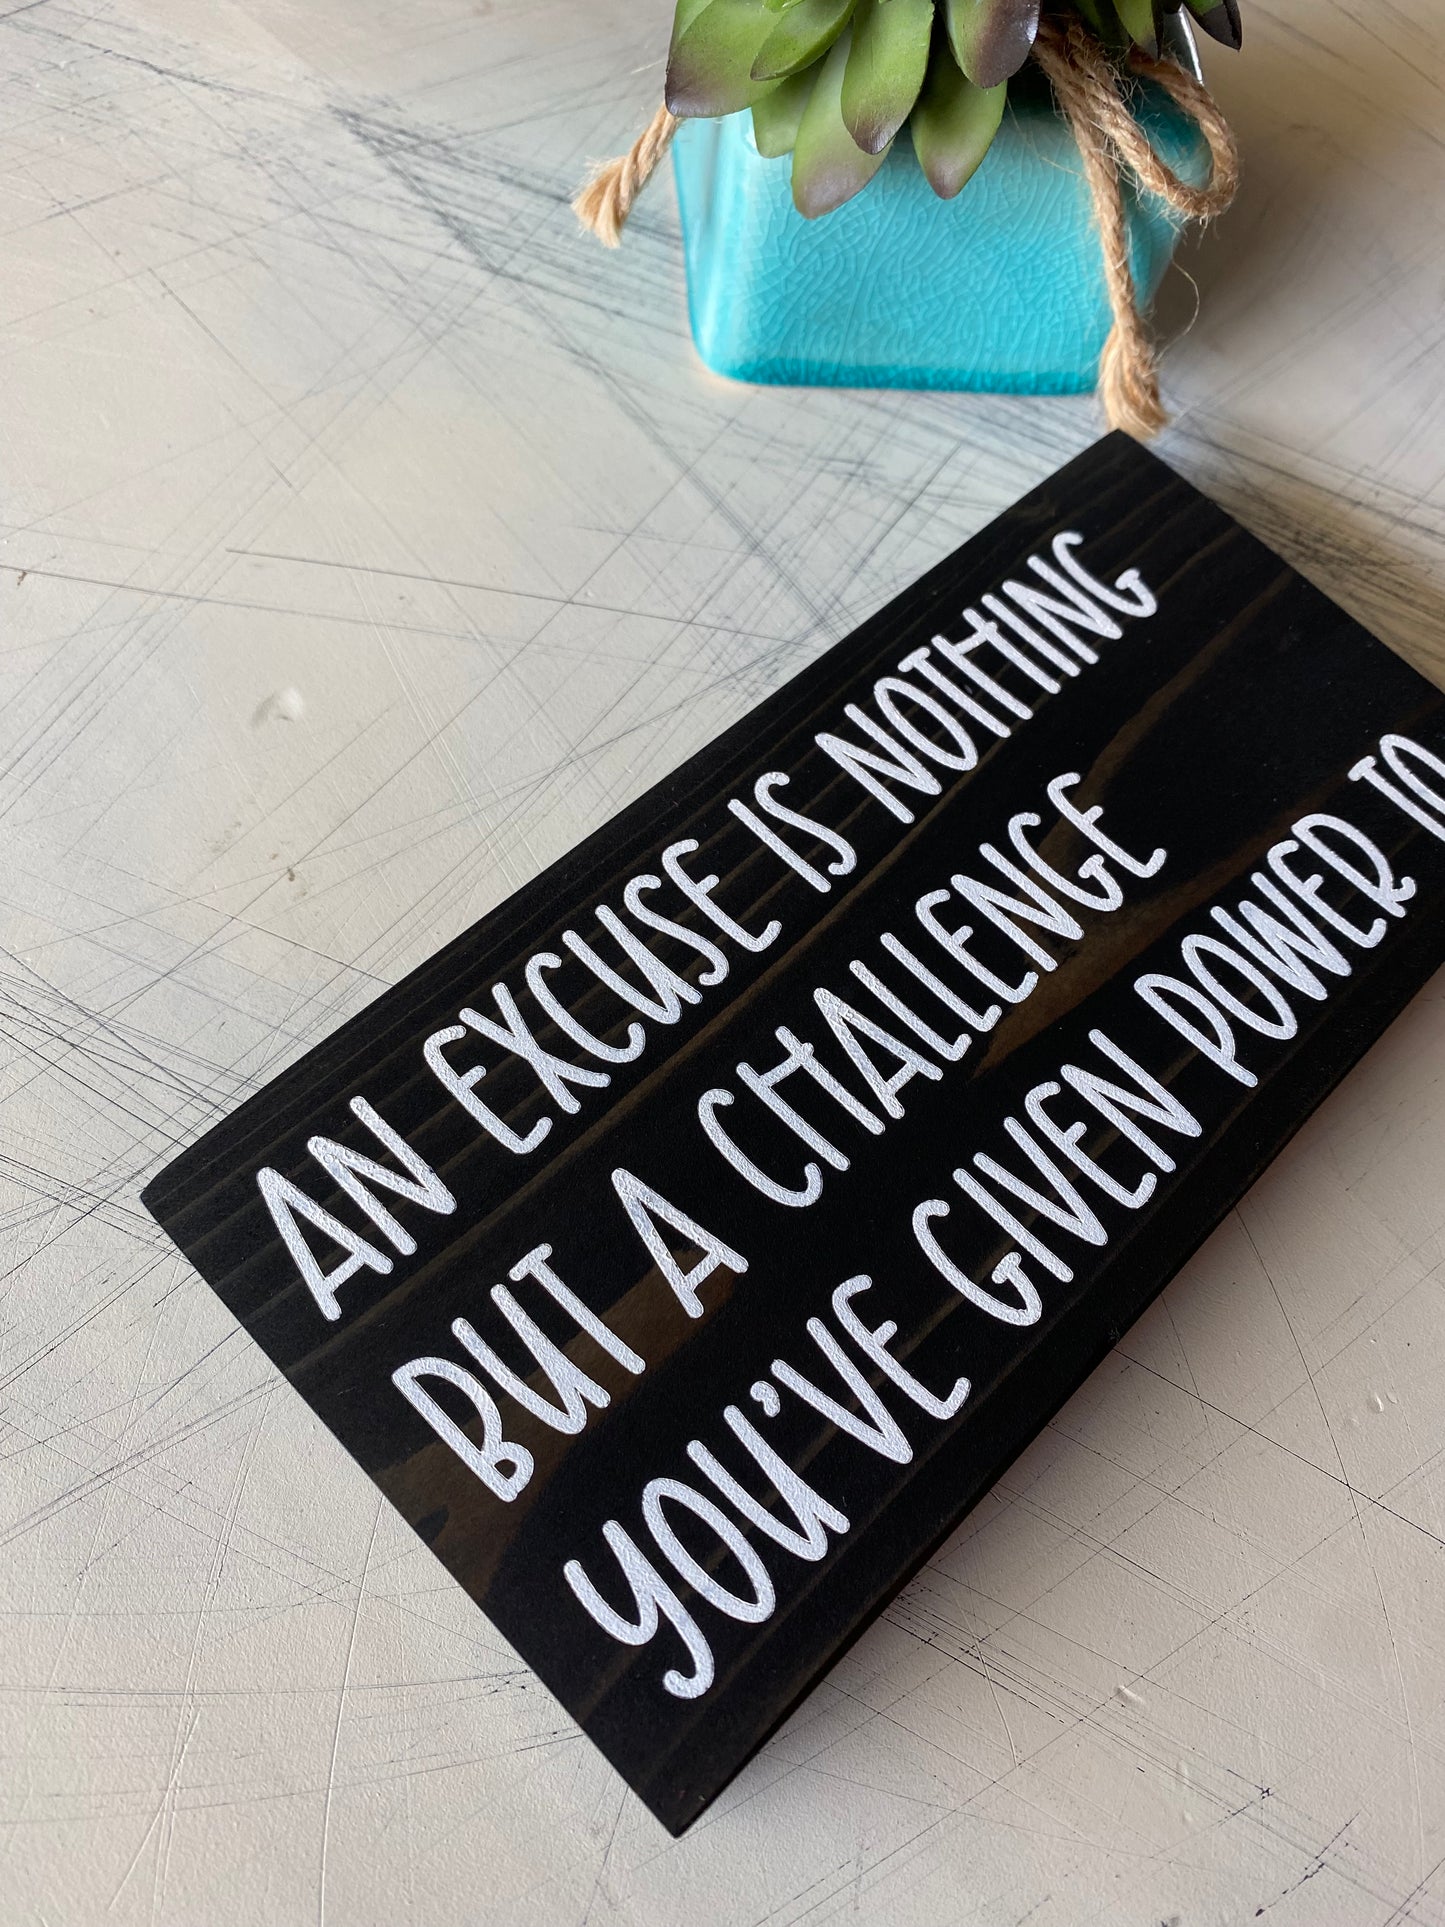 An excuse is nothing but a challenge you've given power to. - mini wood sign